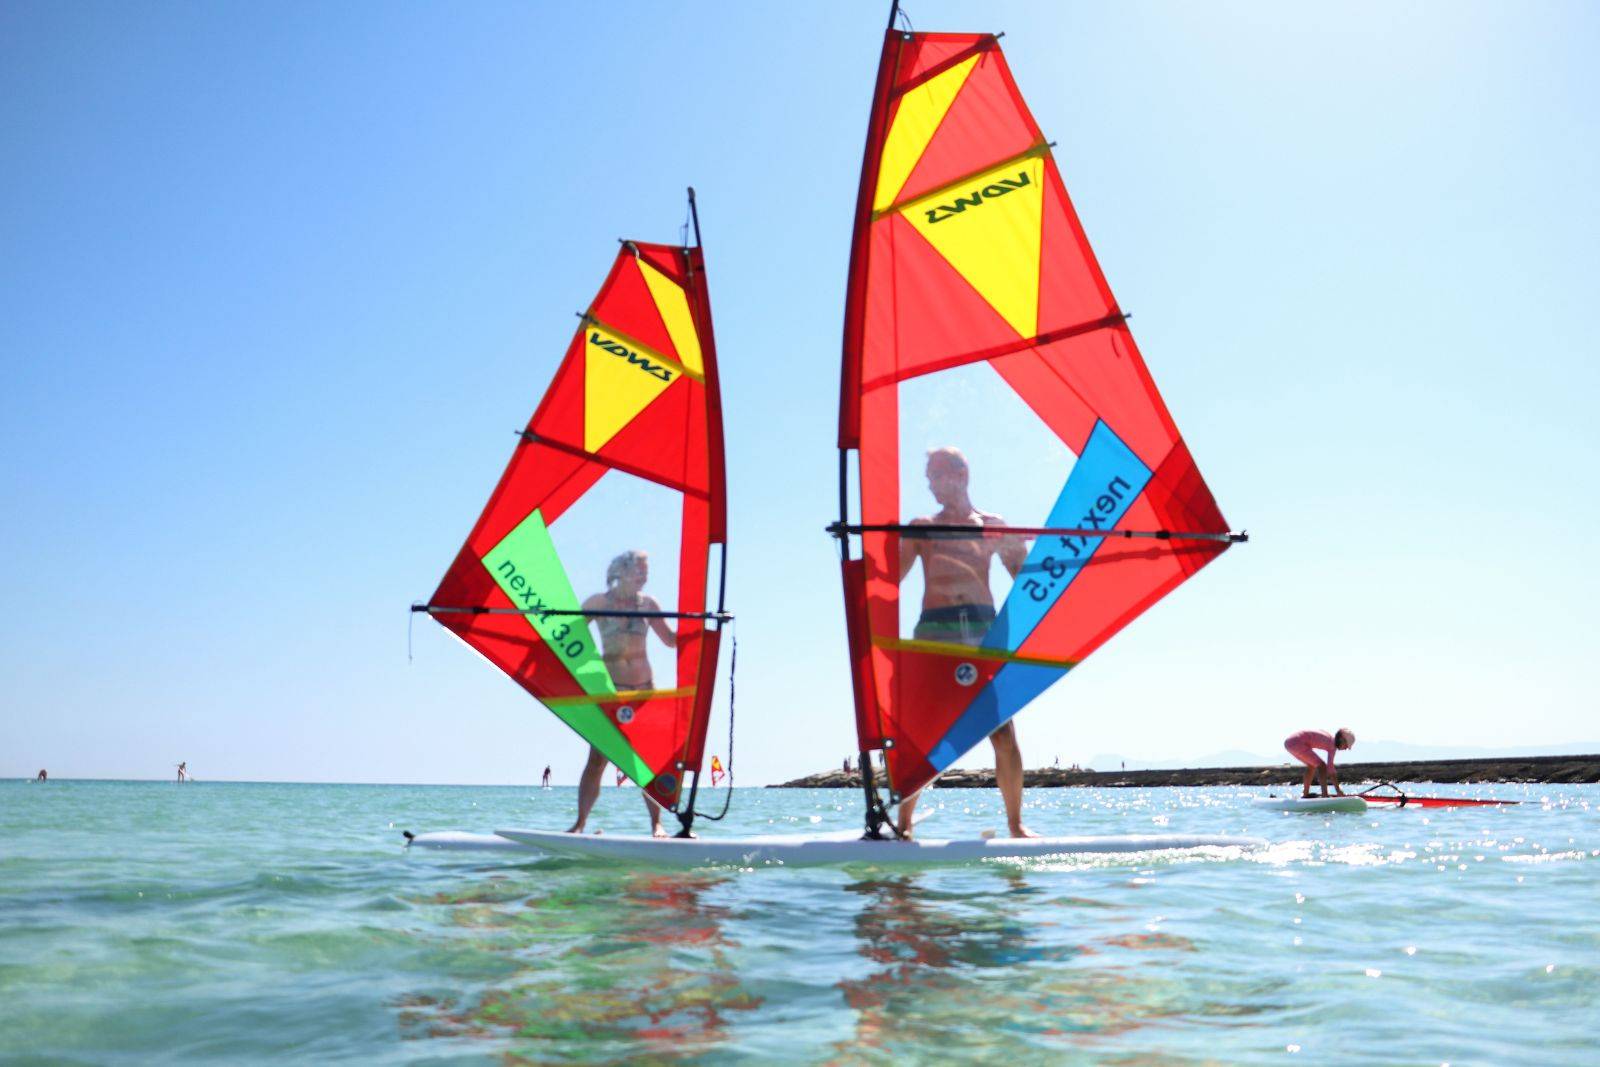 The history of windsurfing